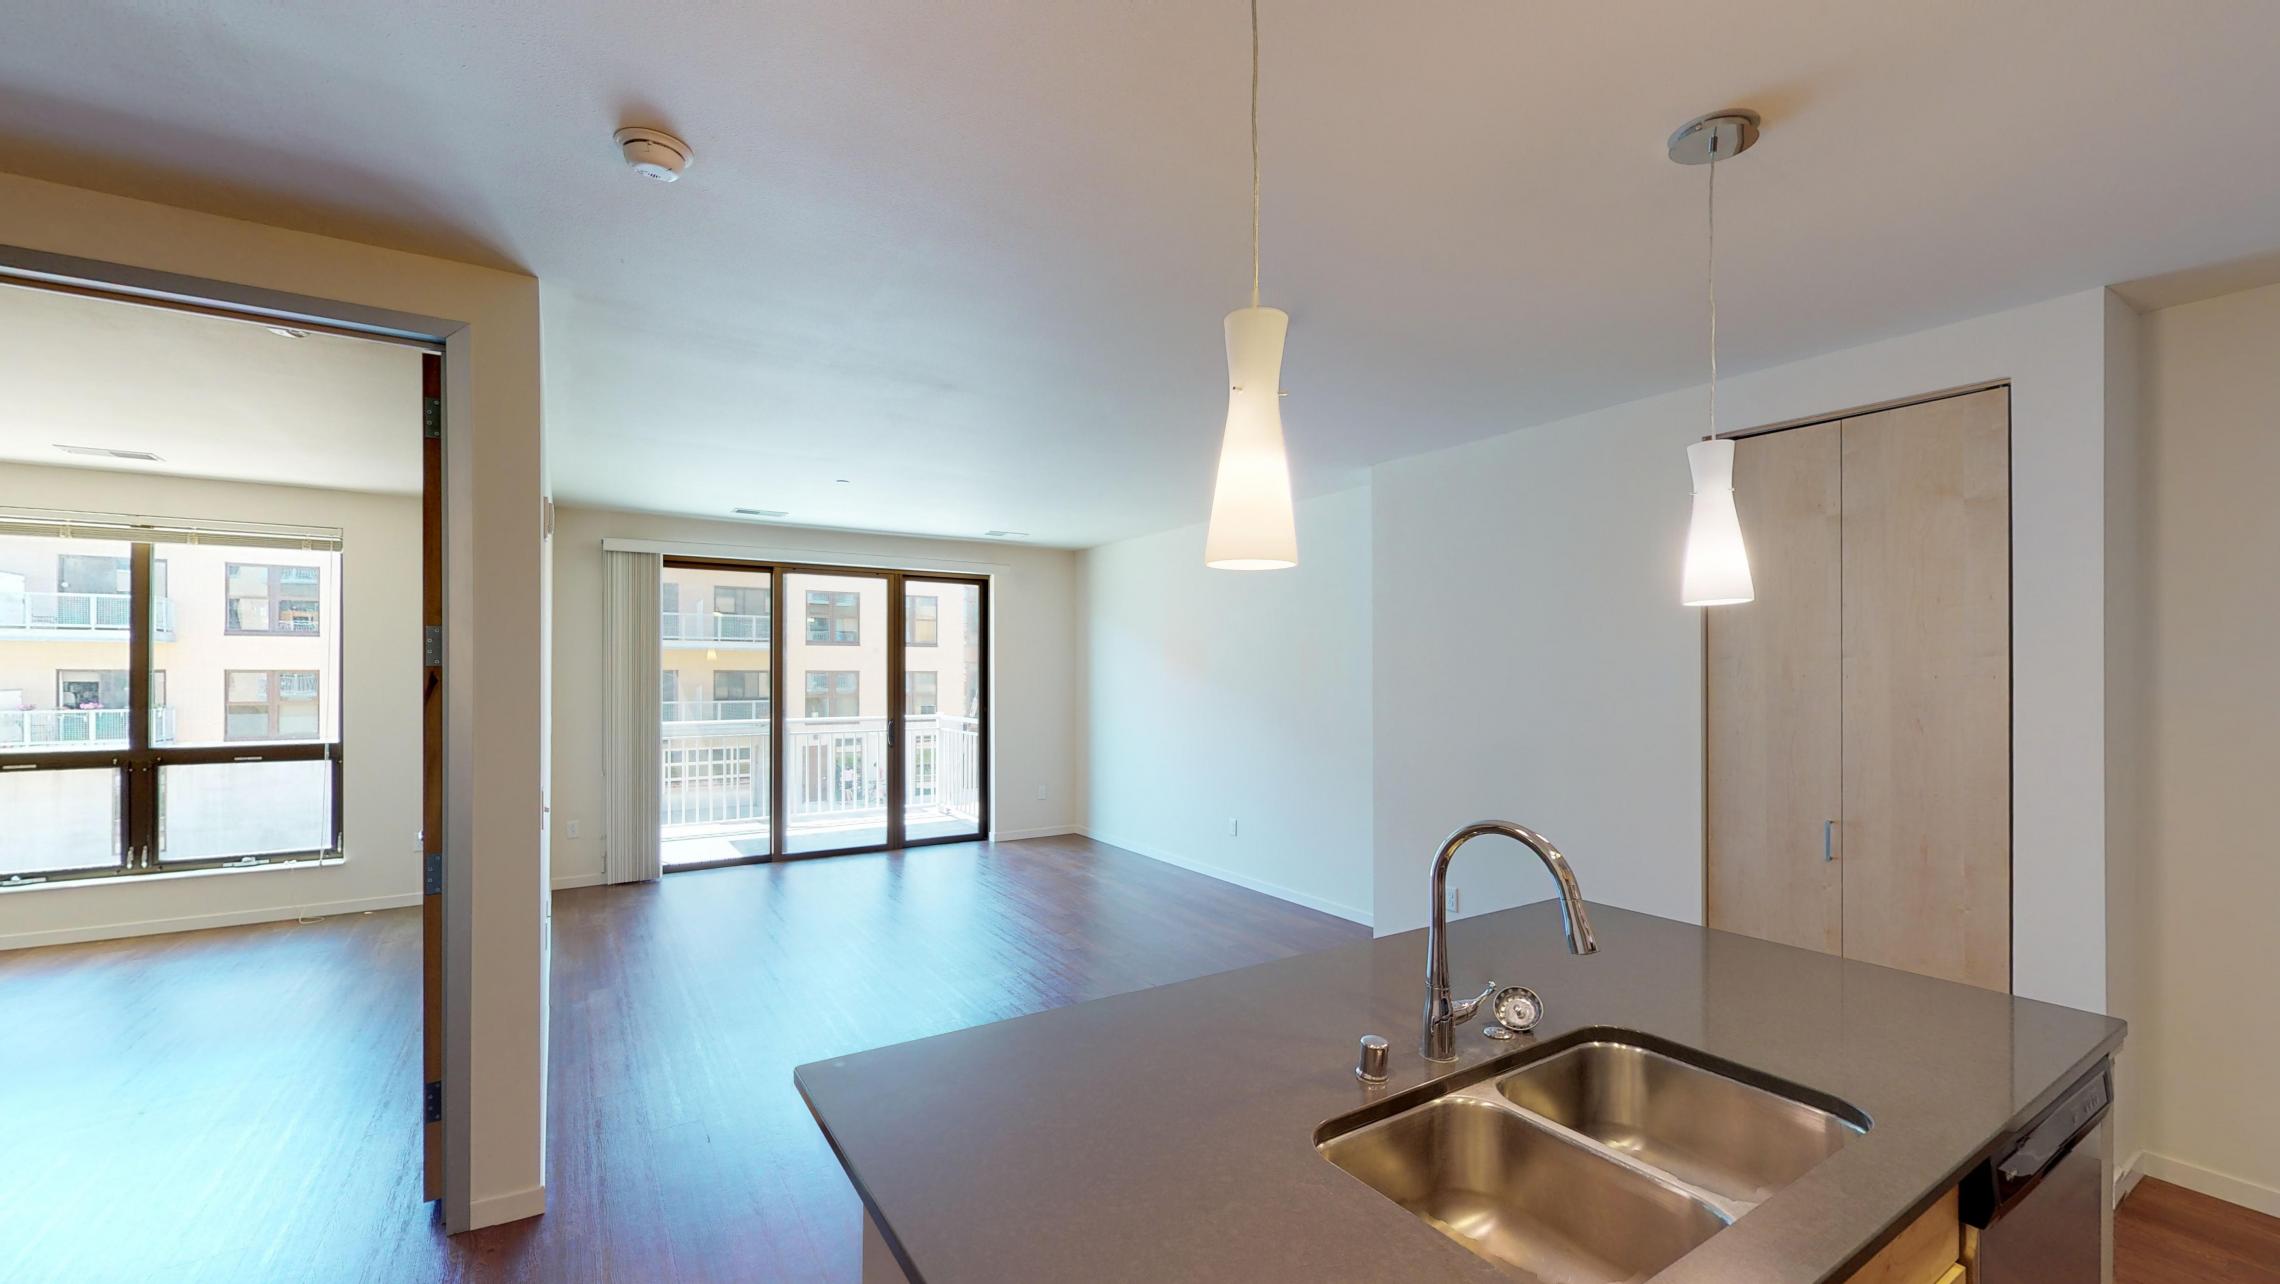 Nine-Line-Apartment-222-One-Bedroom-Living-Kitchen-Upscale-Modern-Design-Downtown-Madison-Sunny-Bright-Lifestyle